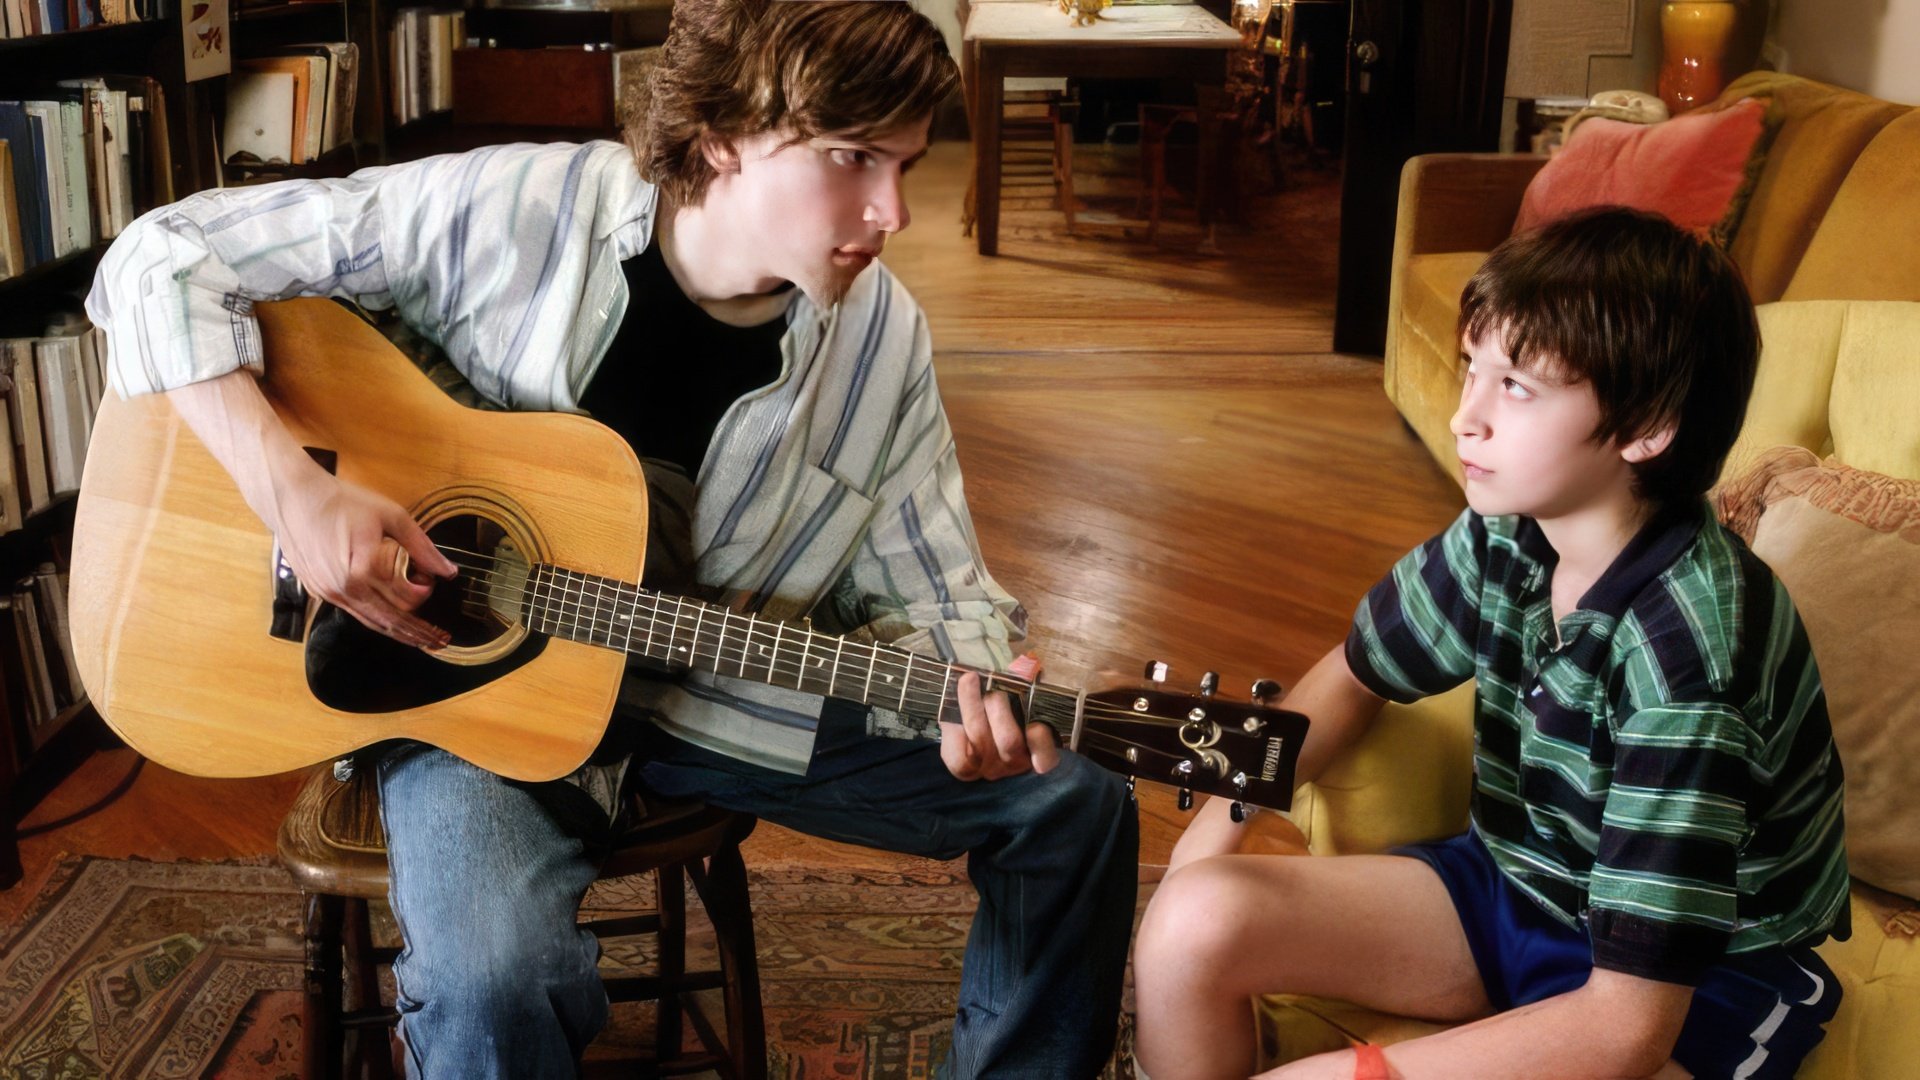 Young Jesse Eisenberg (right) in the movie 'The Squid and the Whale'